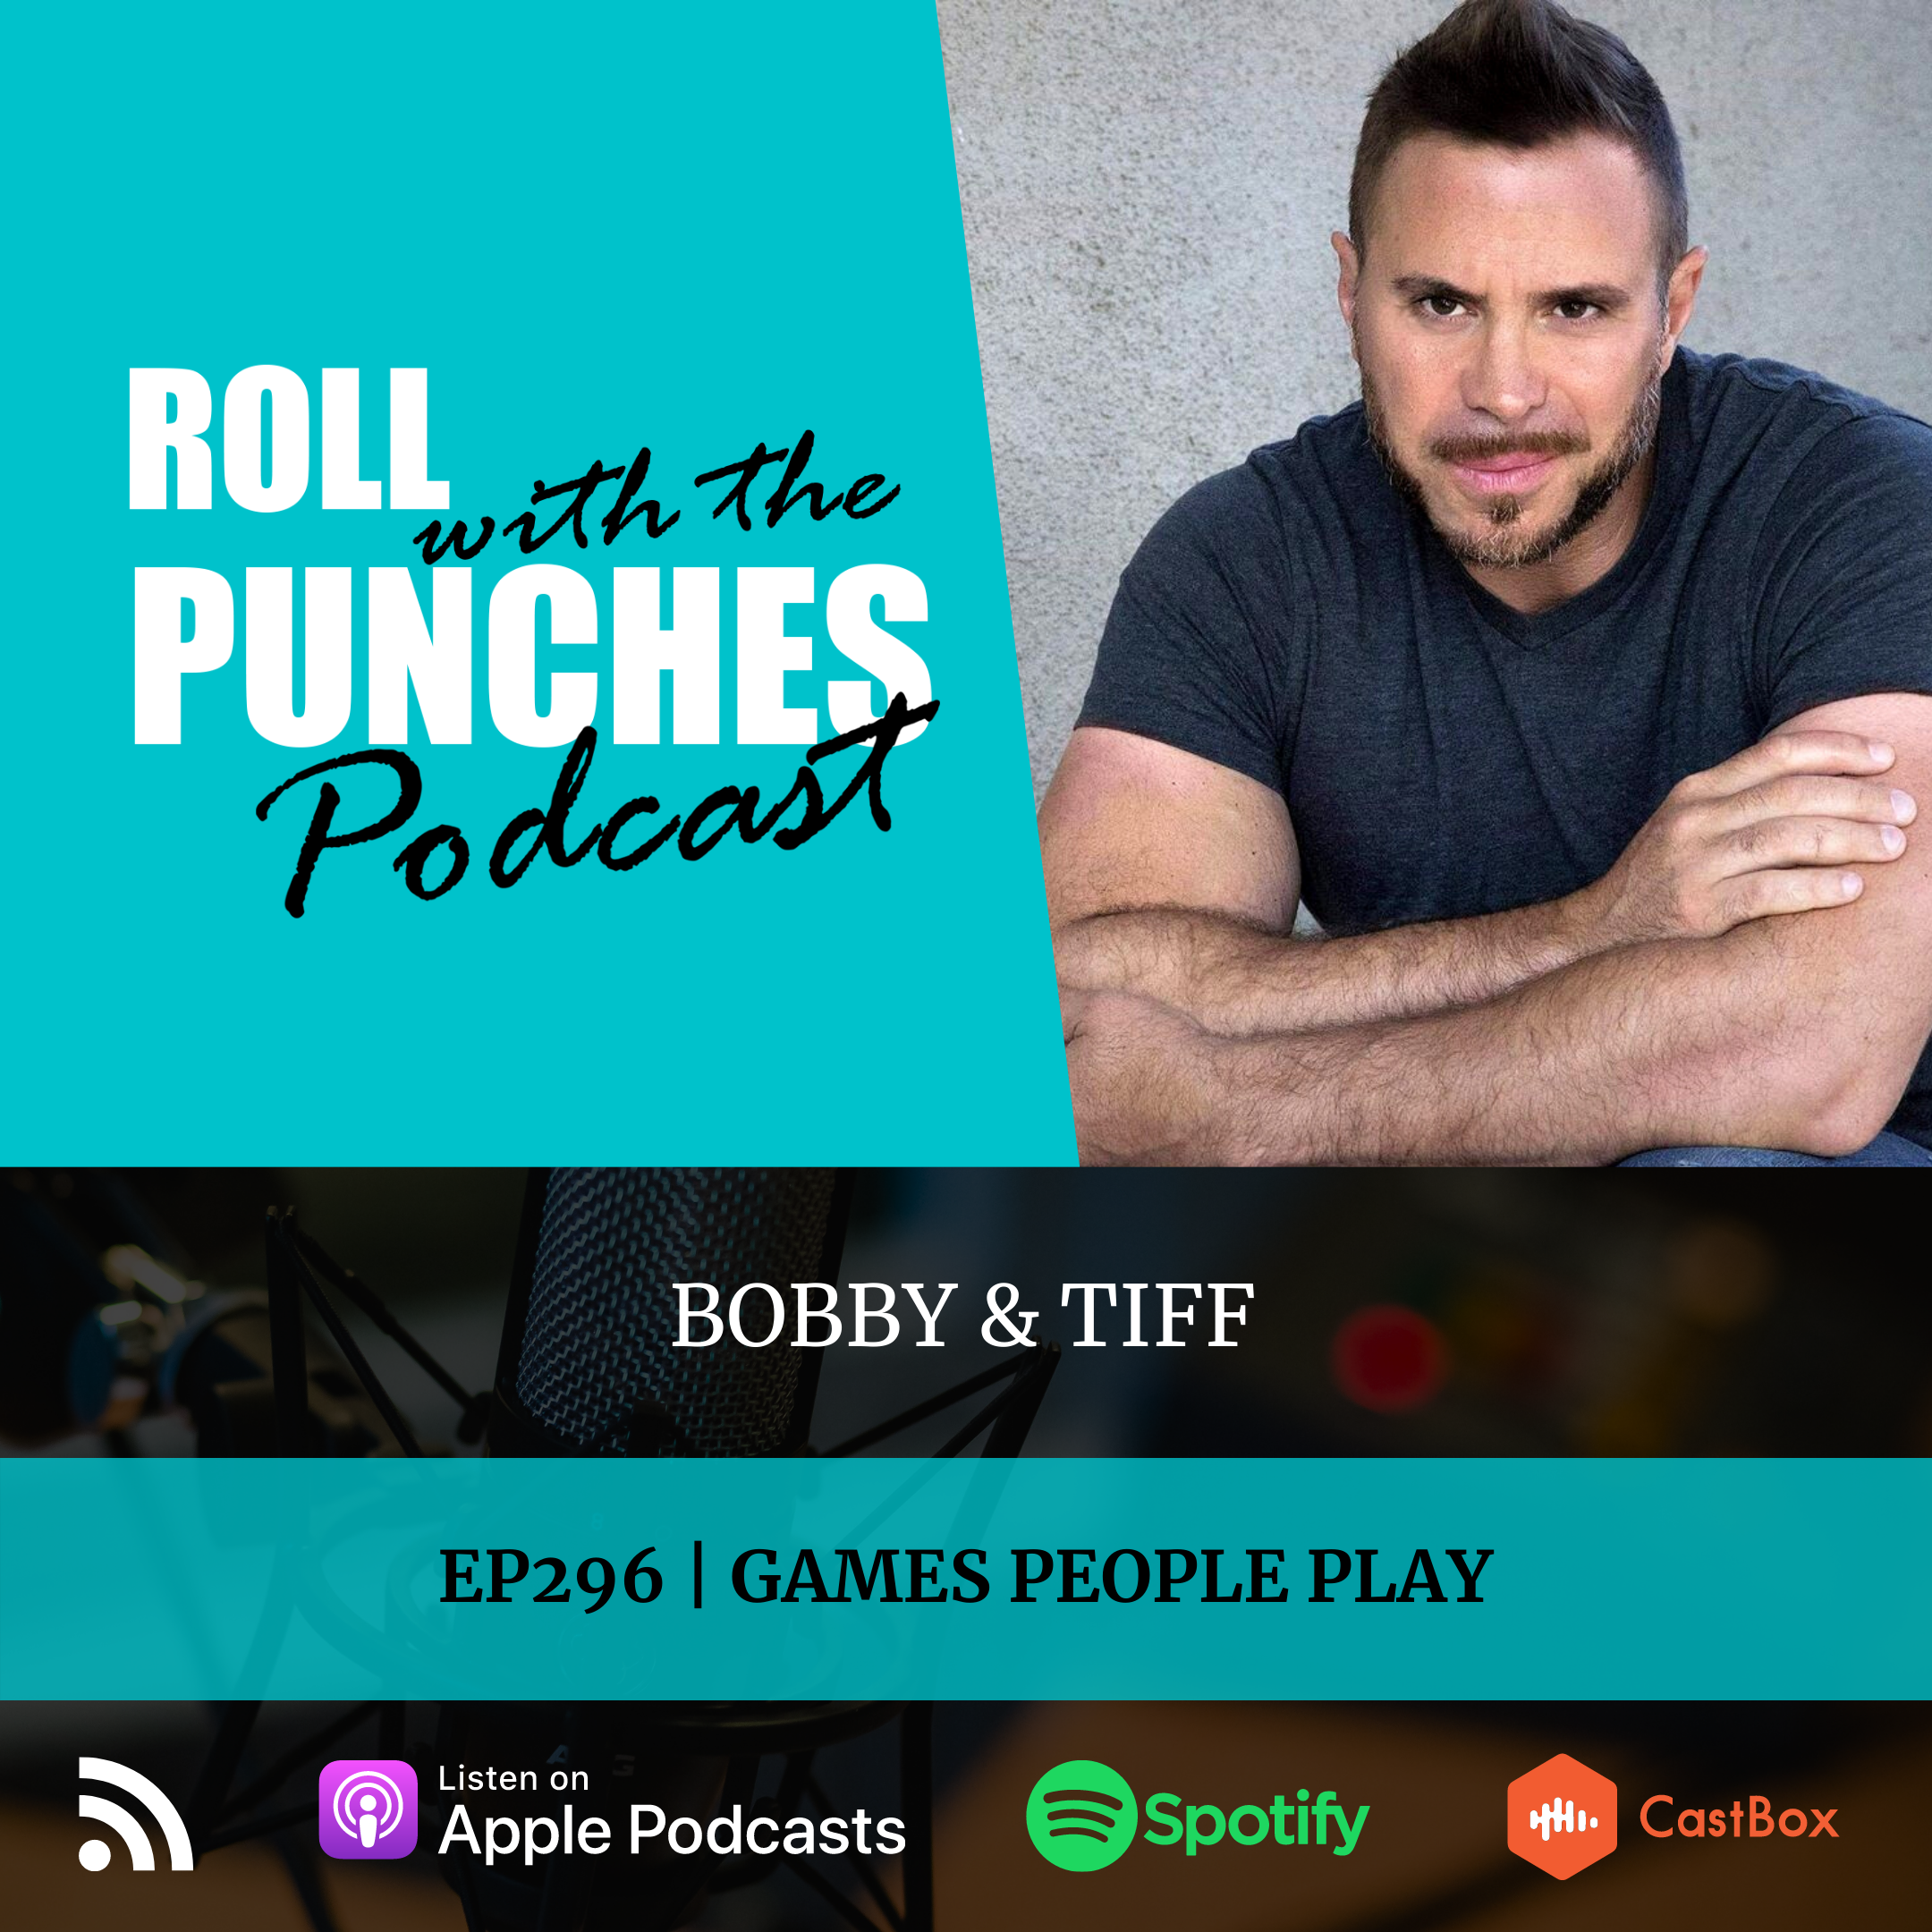 EP296 Games People Play | Bobby & Tiff